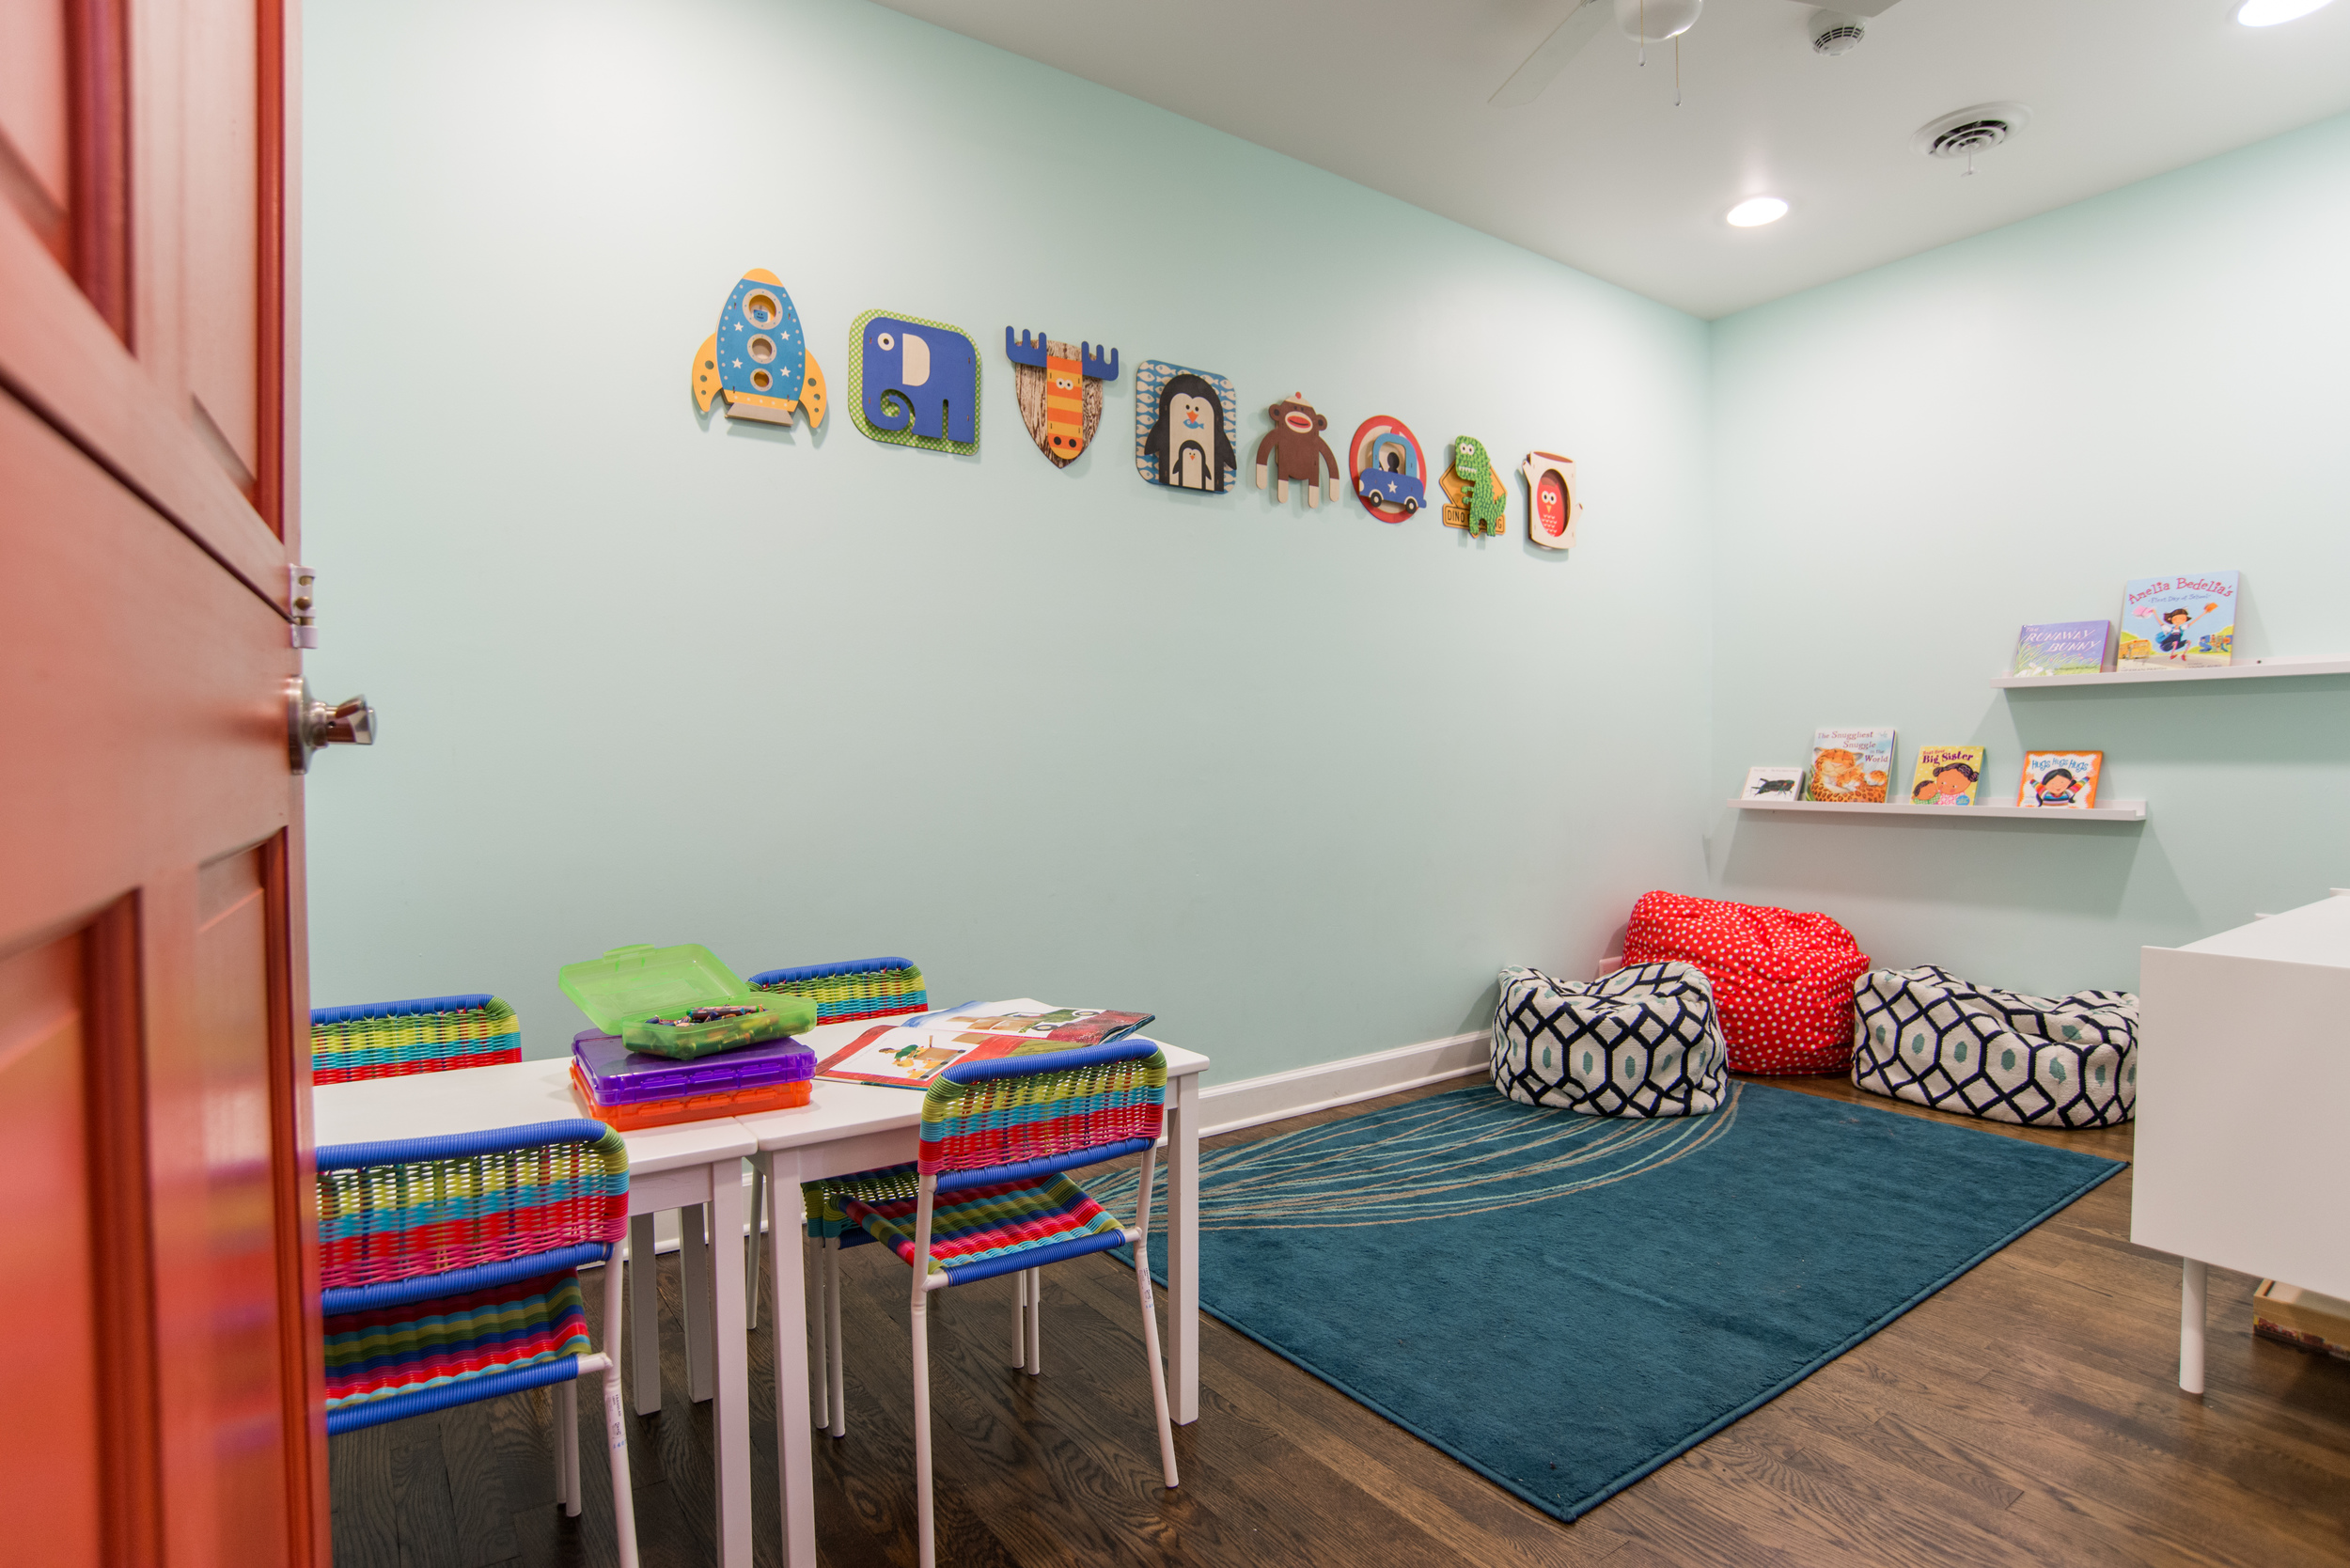 Commercial children's play area designed by Two Hands Interiors.